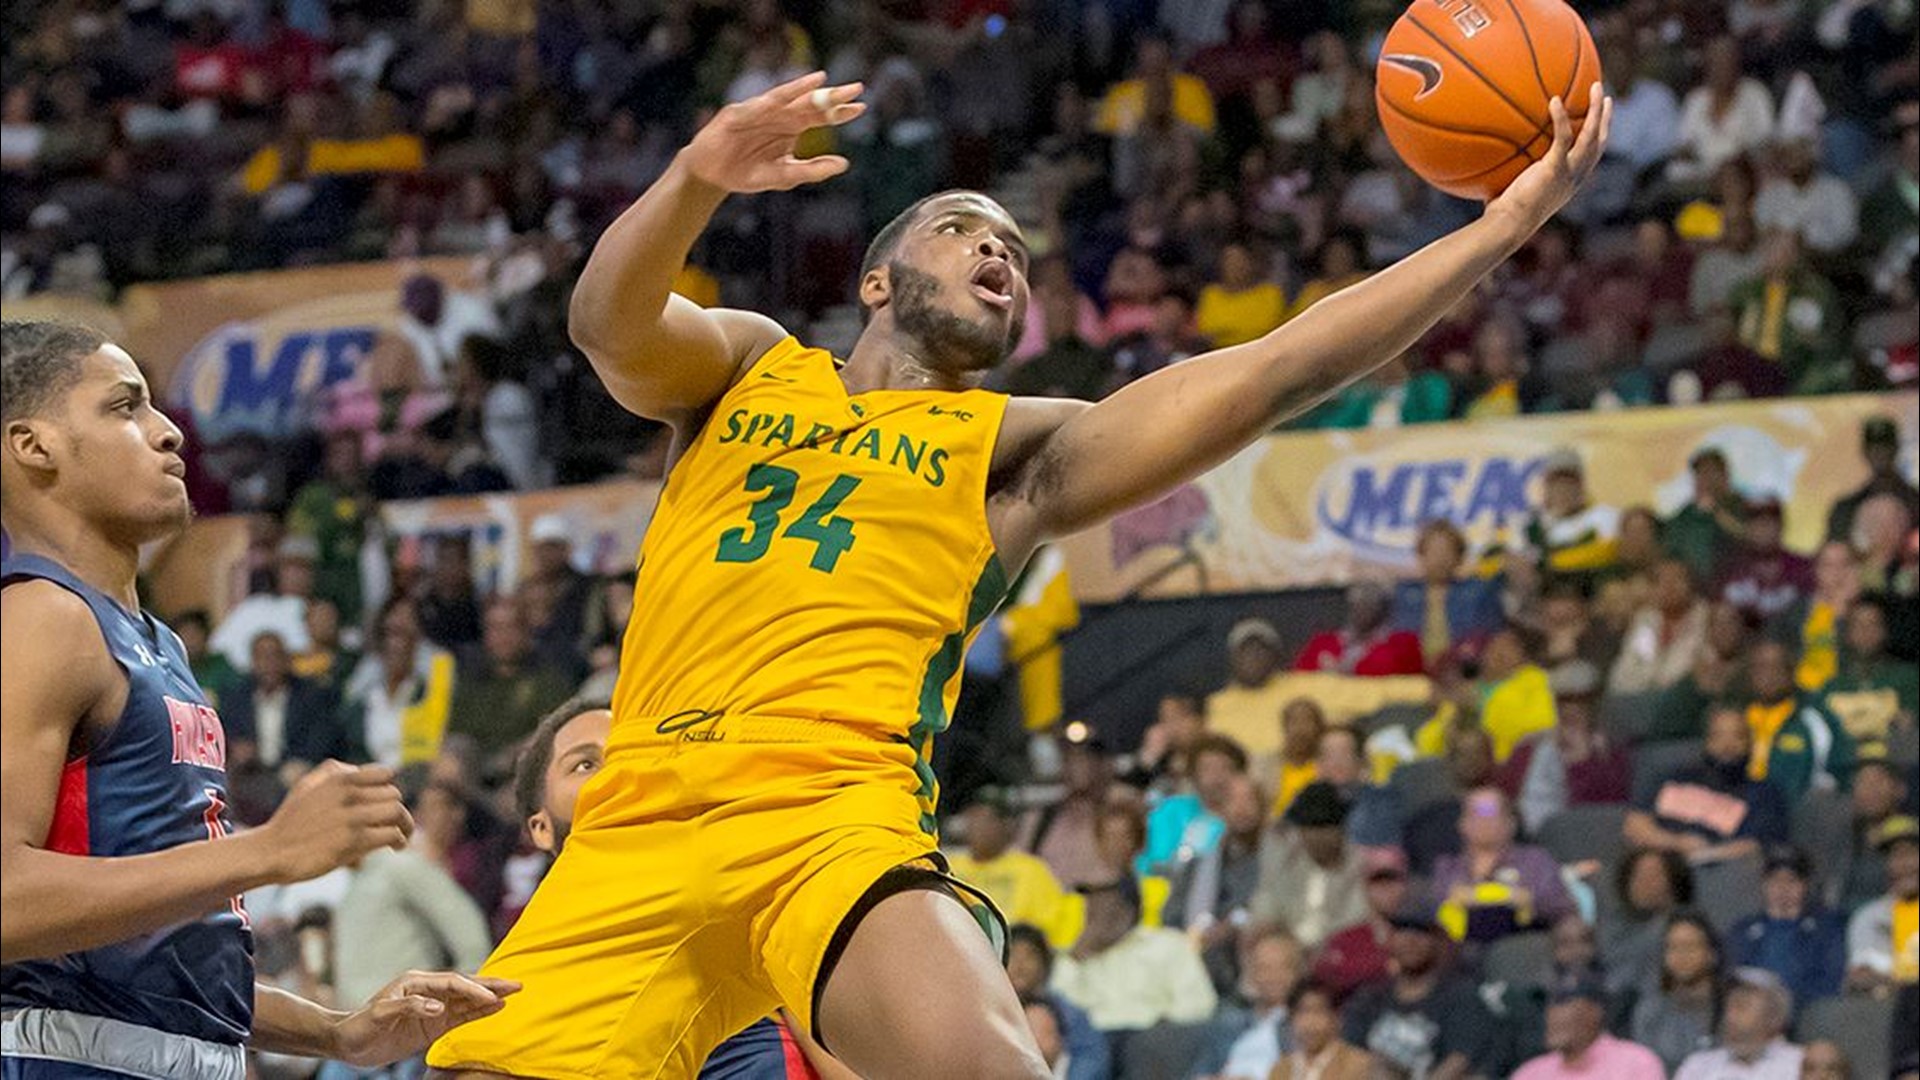 Norfolk State is back in the MEAC final for the 2nd time in 3 years after beating Howard 75-69.